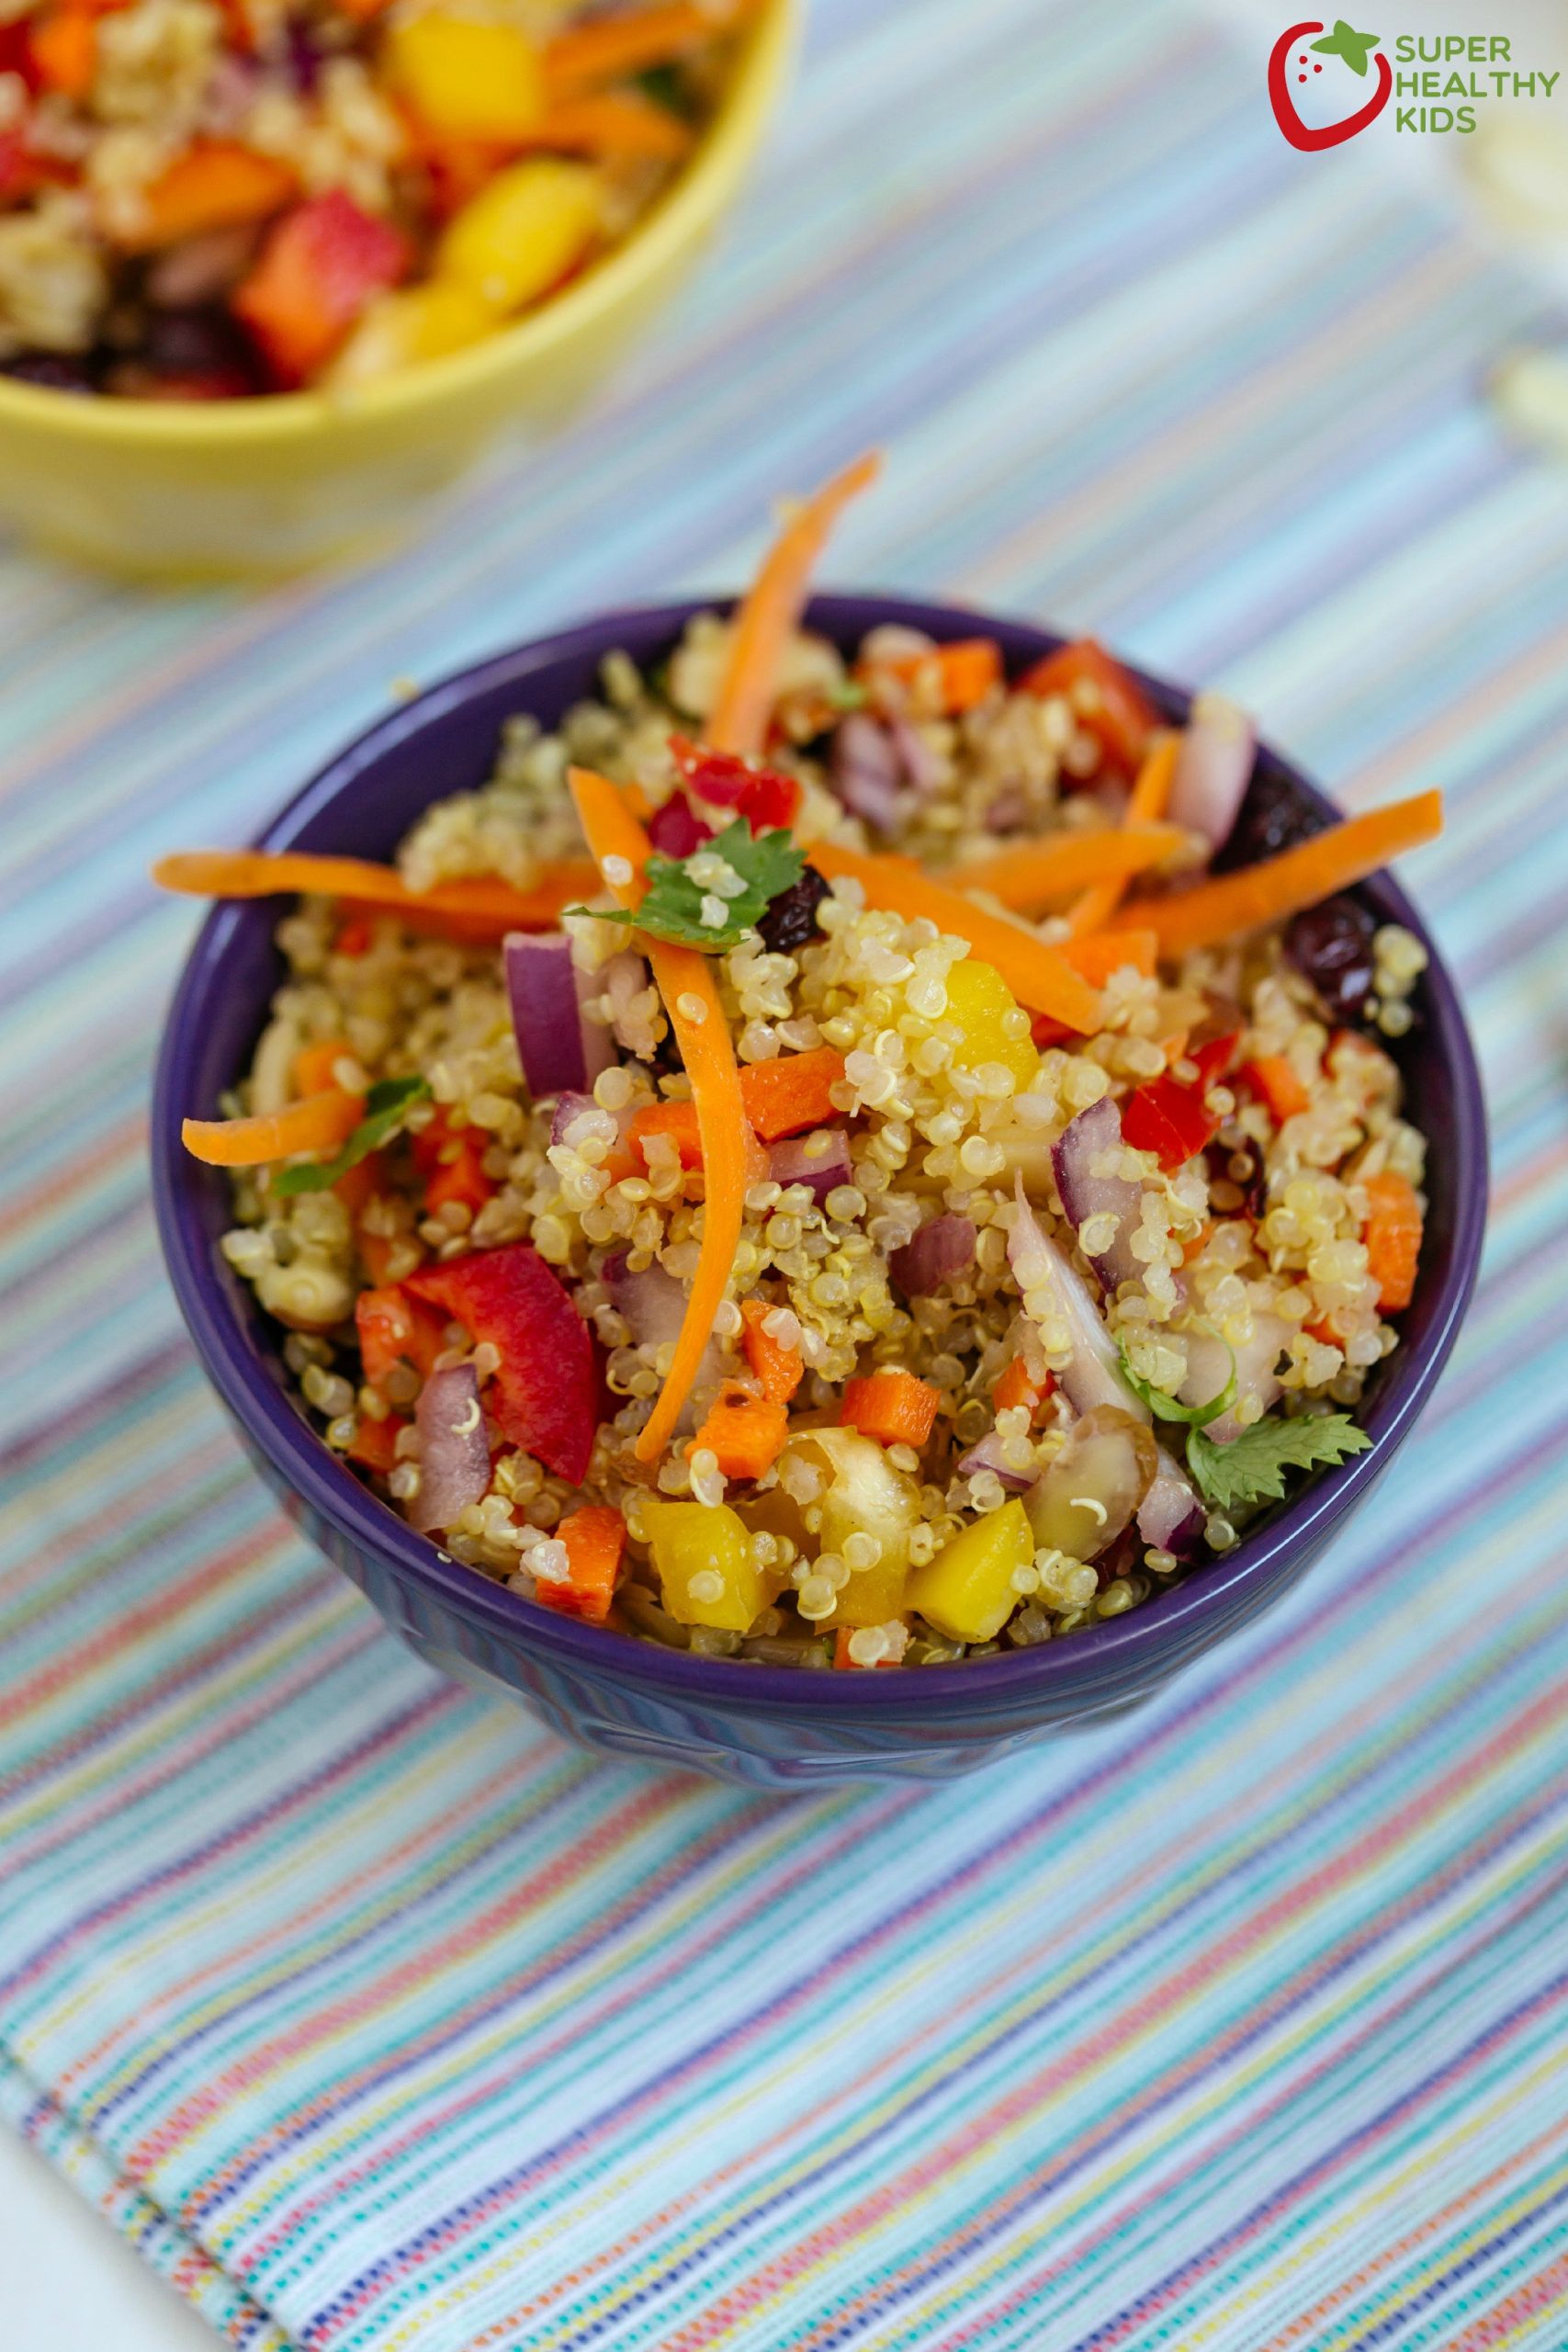 The Best Quinoa Recipes for Kids